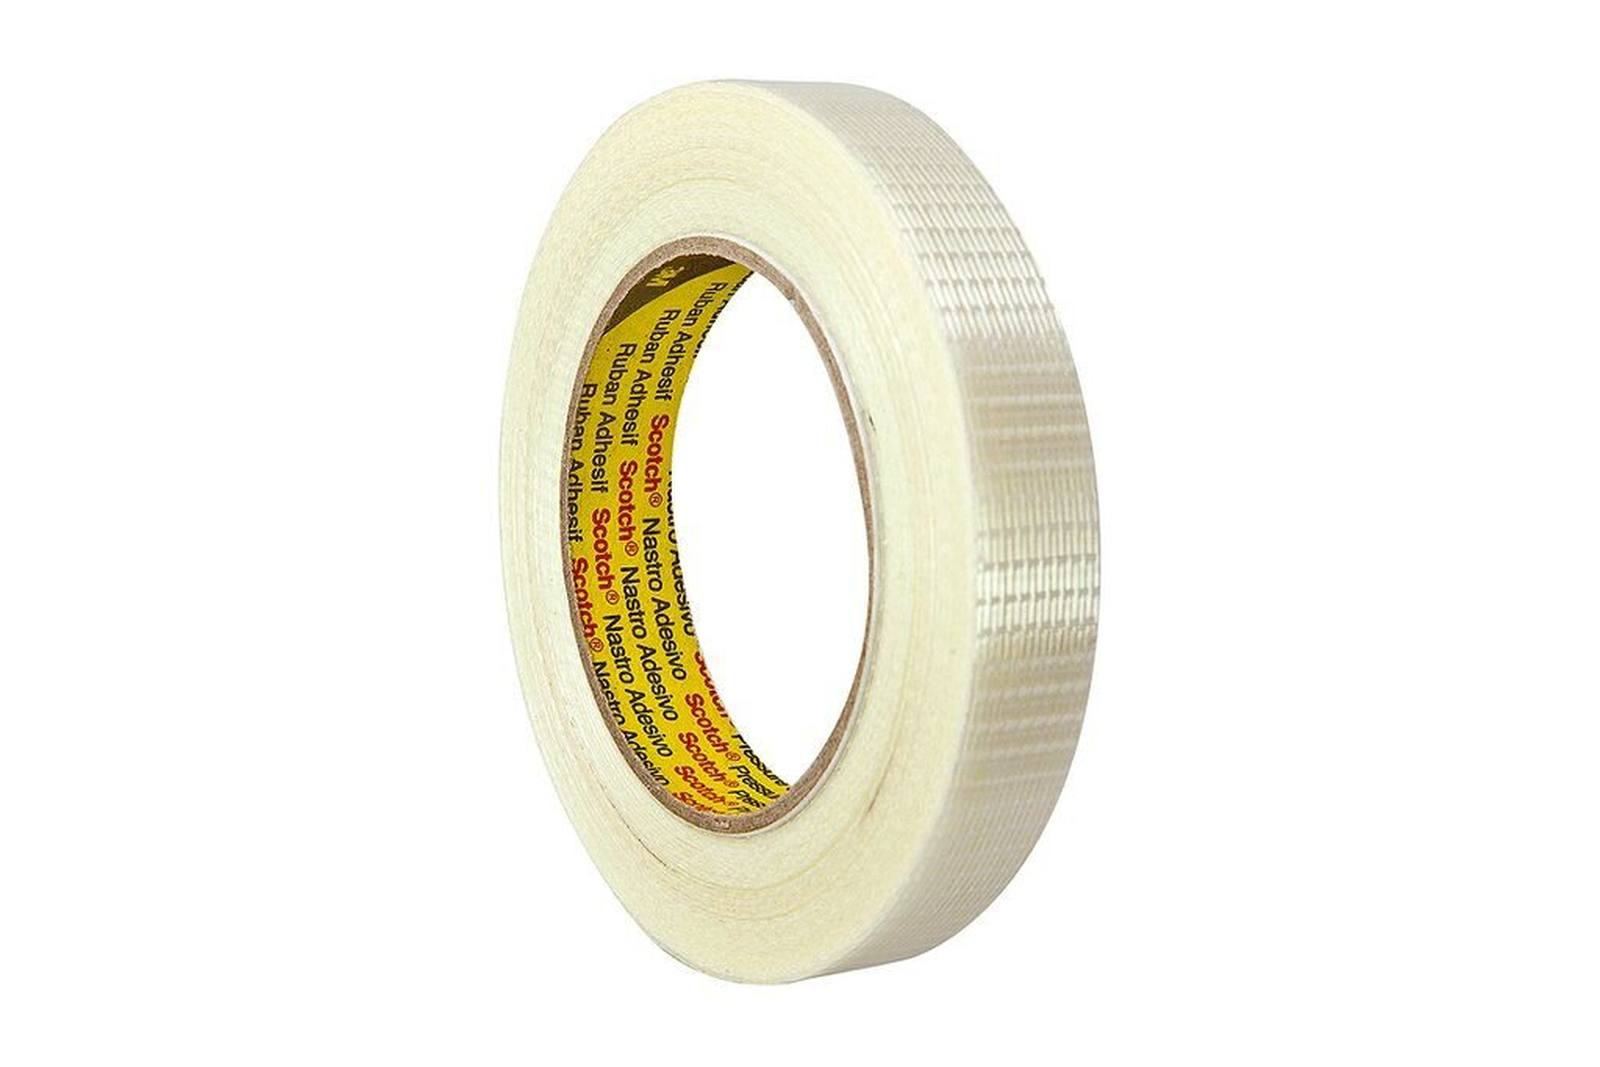 3M Scotch filament tape 8959, transparent, 50 mm x 50 m, 0.145 mm, individually packed